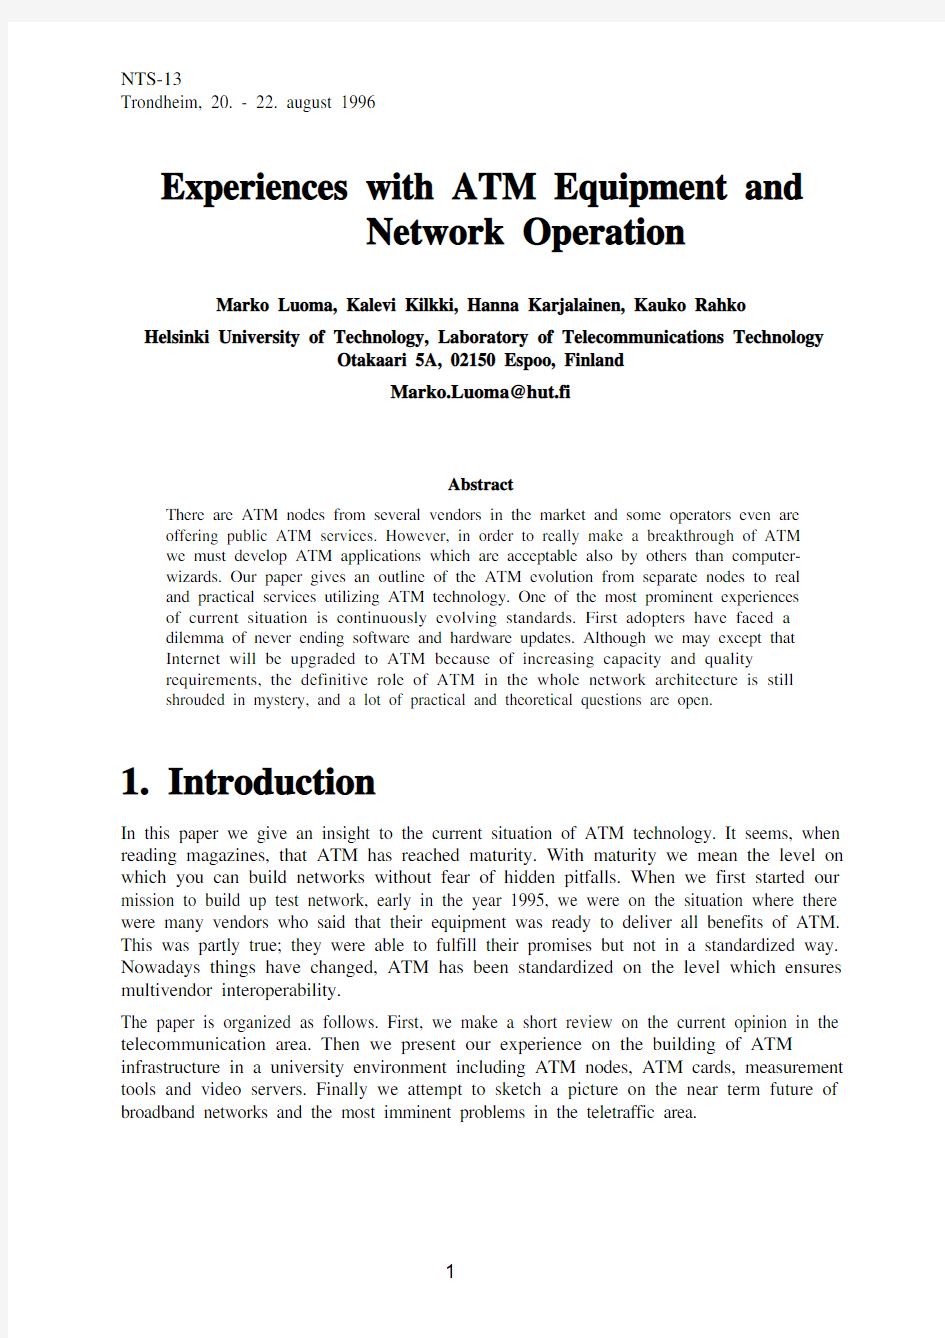 Experiences with ATM Equipment and Network Operation